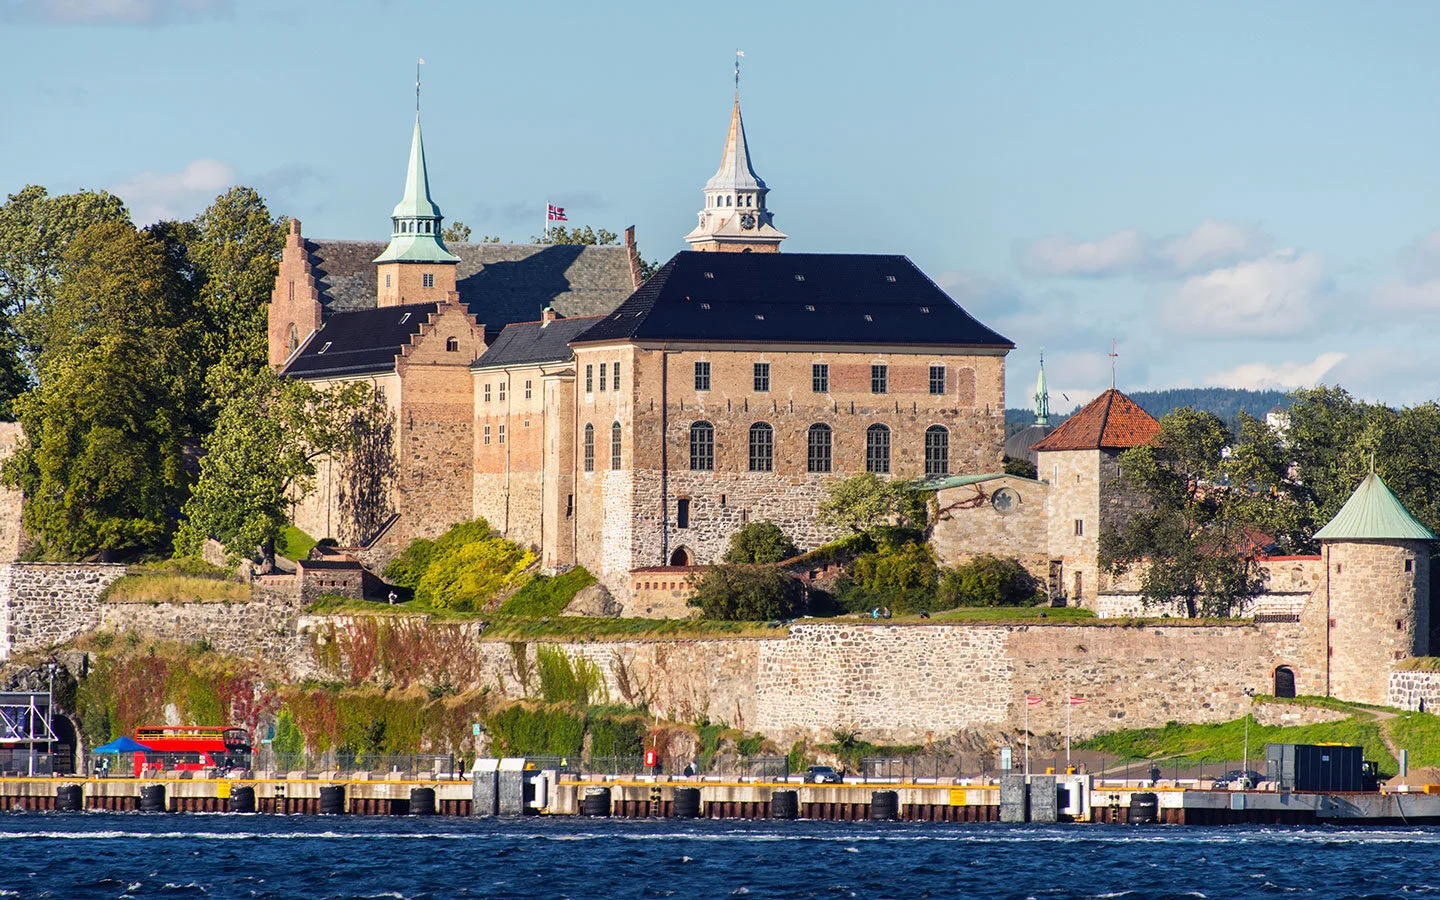 The Akershus Fortress in Oslo, Norway